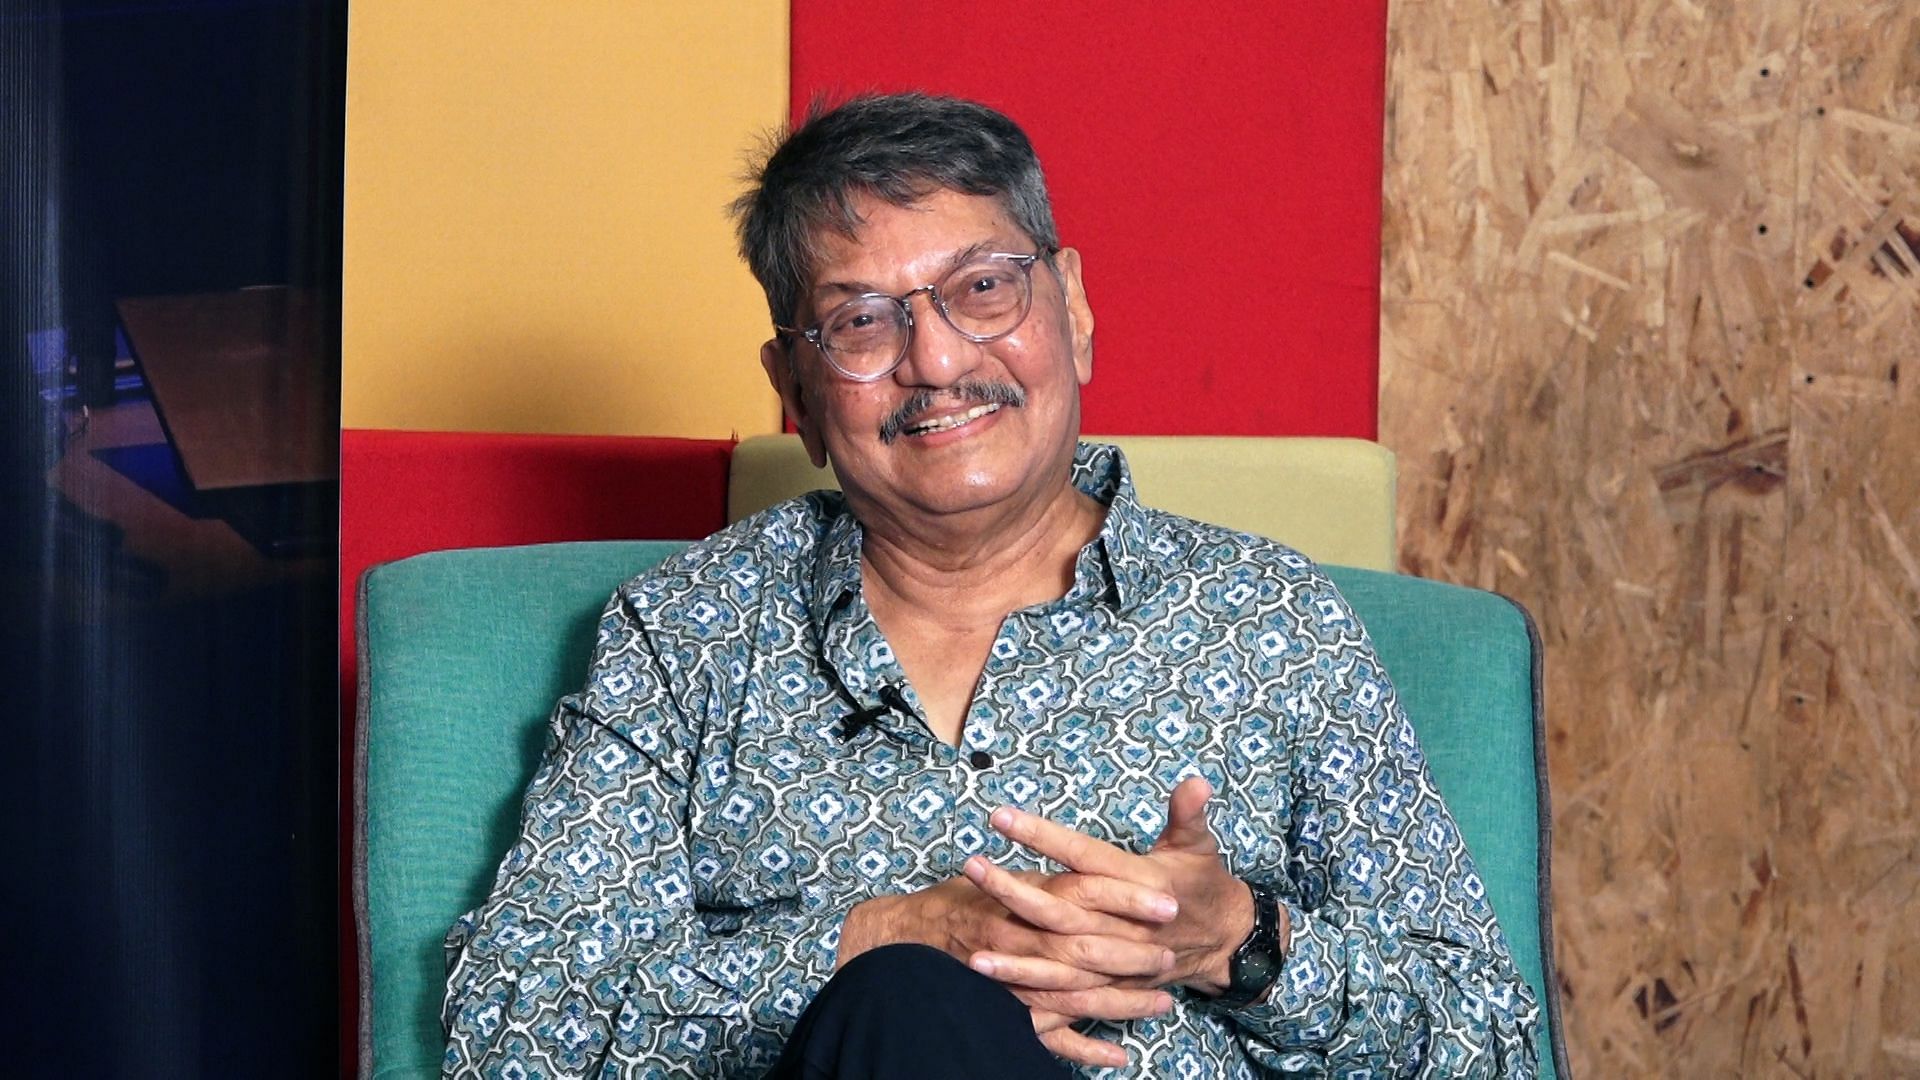 Amol Palekar speaks about being labelled an anti-national for having a different opinion in today’s India.